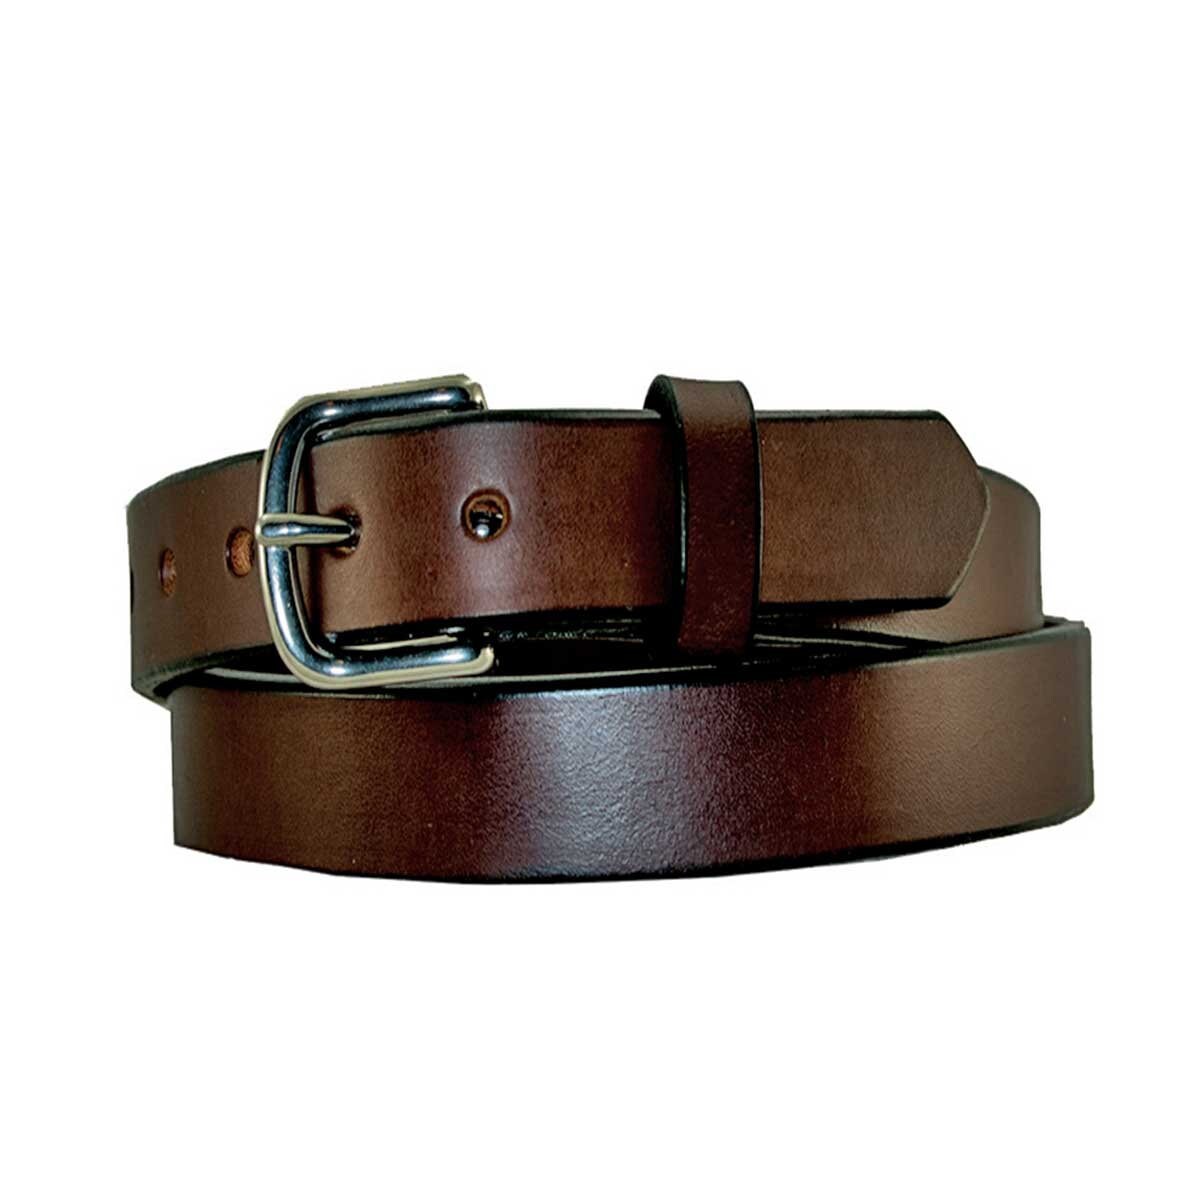 Thin Leather Belt Amish Handcrafted Men's Woman's Dress Belt Casual ...